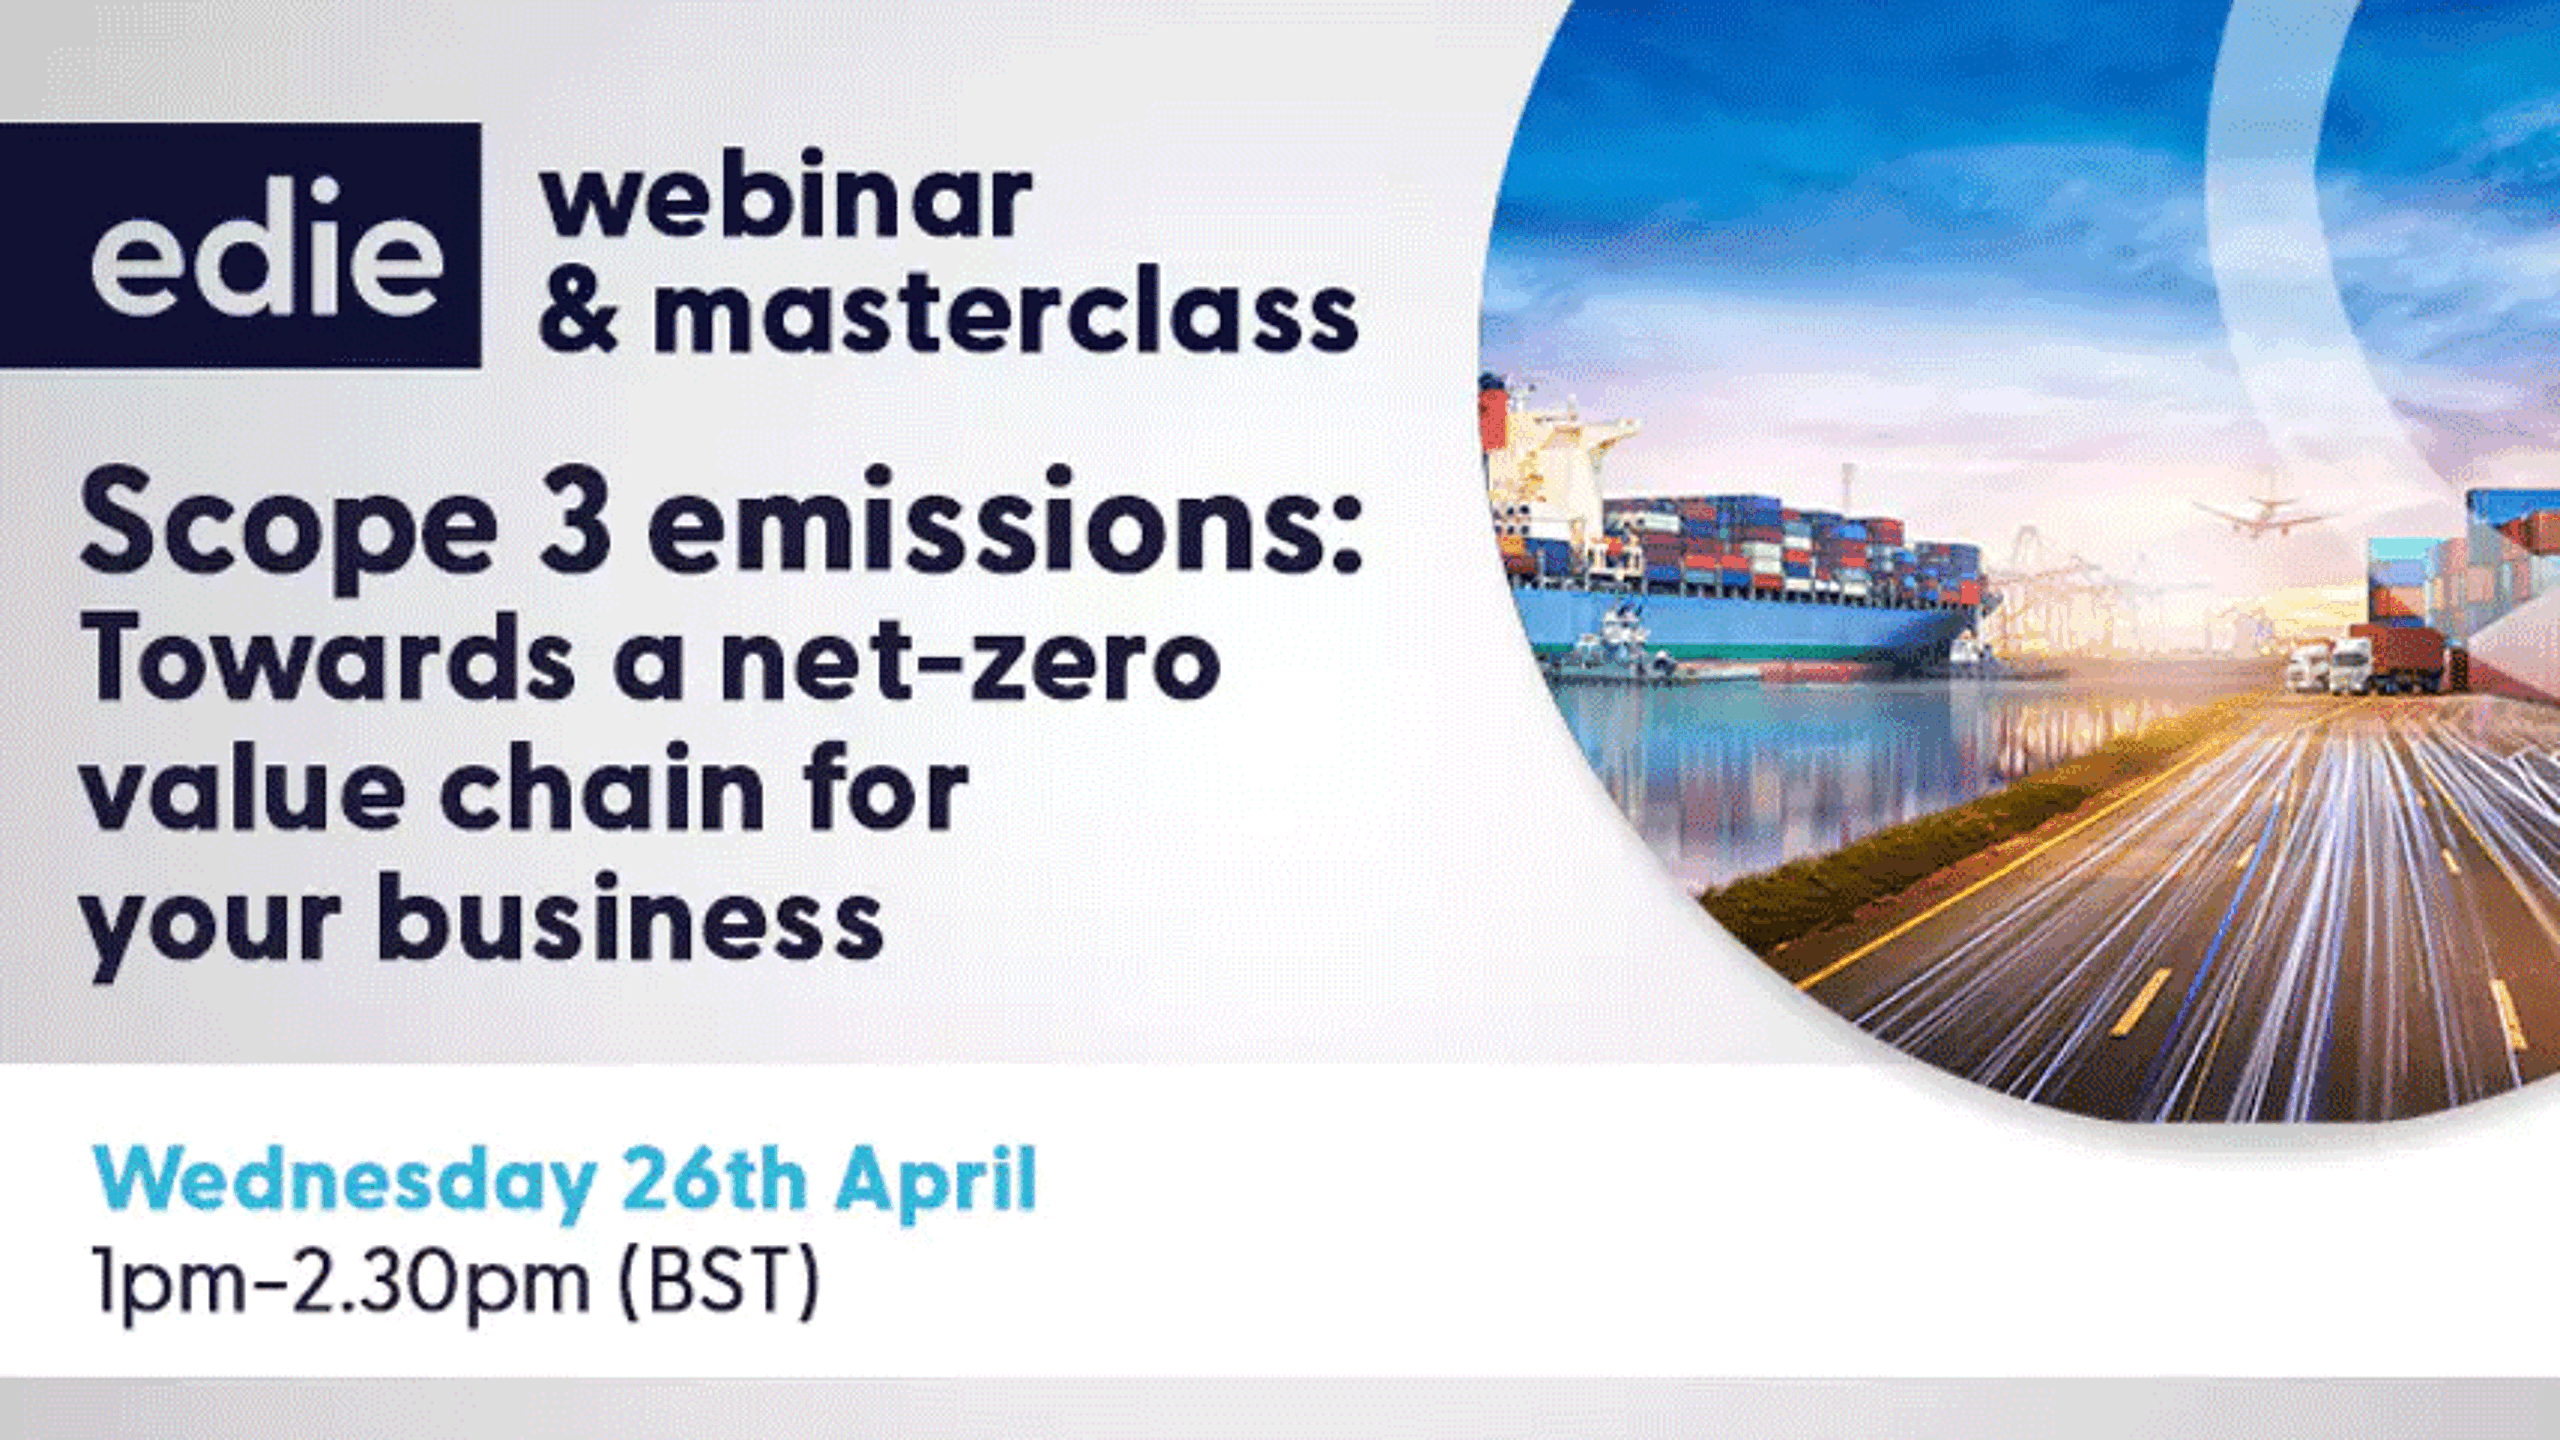 Registration now open for edie’s online event on managing Scope 3 emissions